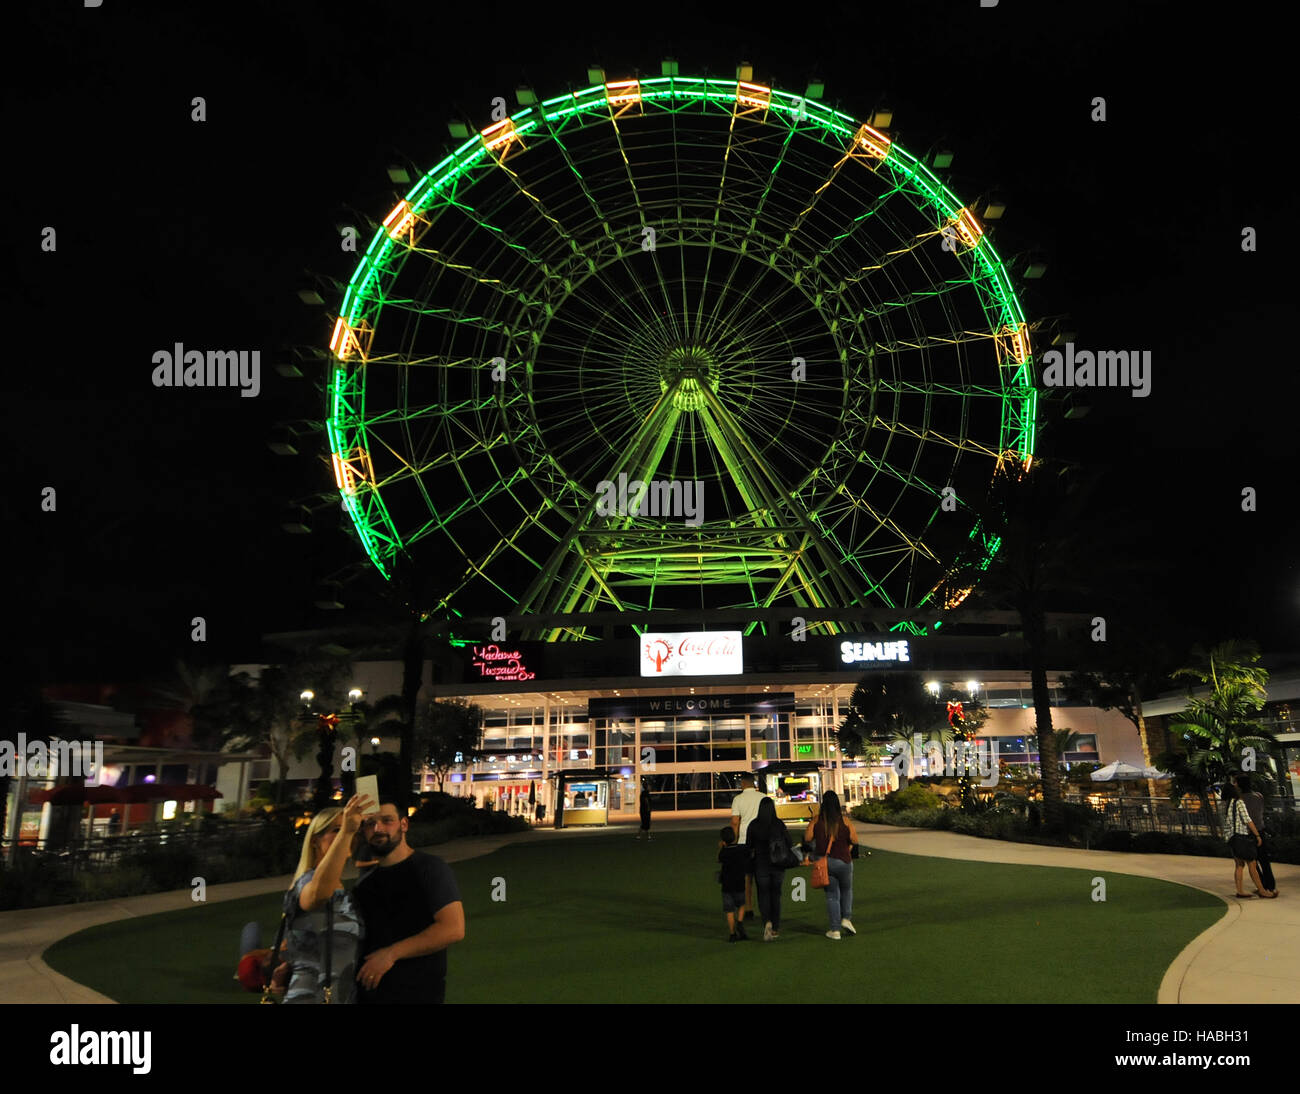 Orlando, Florida, USA. 29th November, 2016. The Orlando Eye observation wheel is illuminated in green in honor of the members of Brazil's Chapecoense soccer team who died when their chartered plane crashed on November 28, 2016 in the mountains of Colombia, killing 71 of the 81 persons on board. The team was scheduled to play in the Copa Sudamerica finals against Atletico Nacional on Wednesday in Medellin. (Paul Hennessy/Alamy) Credit:  Paul Hennessy/Alamy Live News Stock Photo